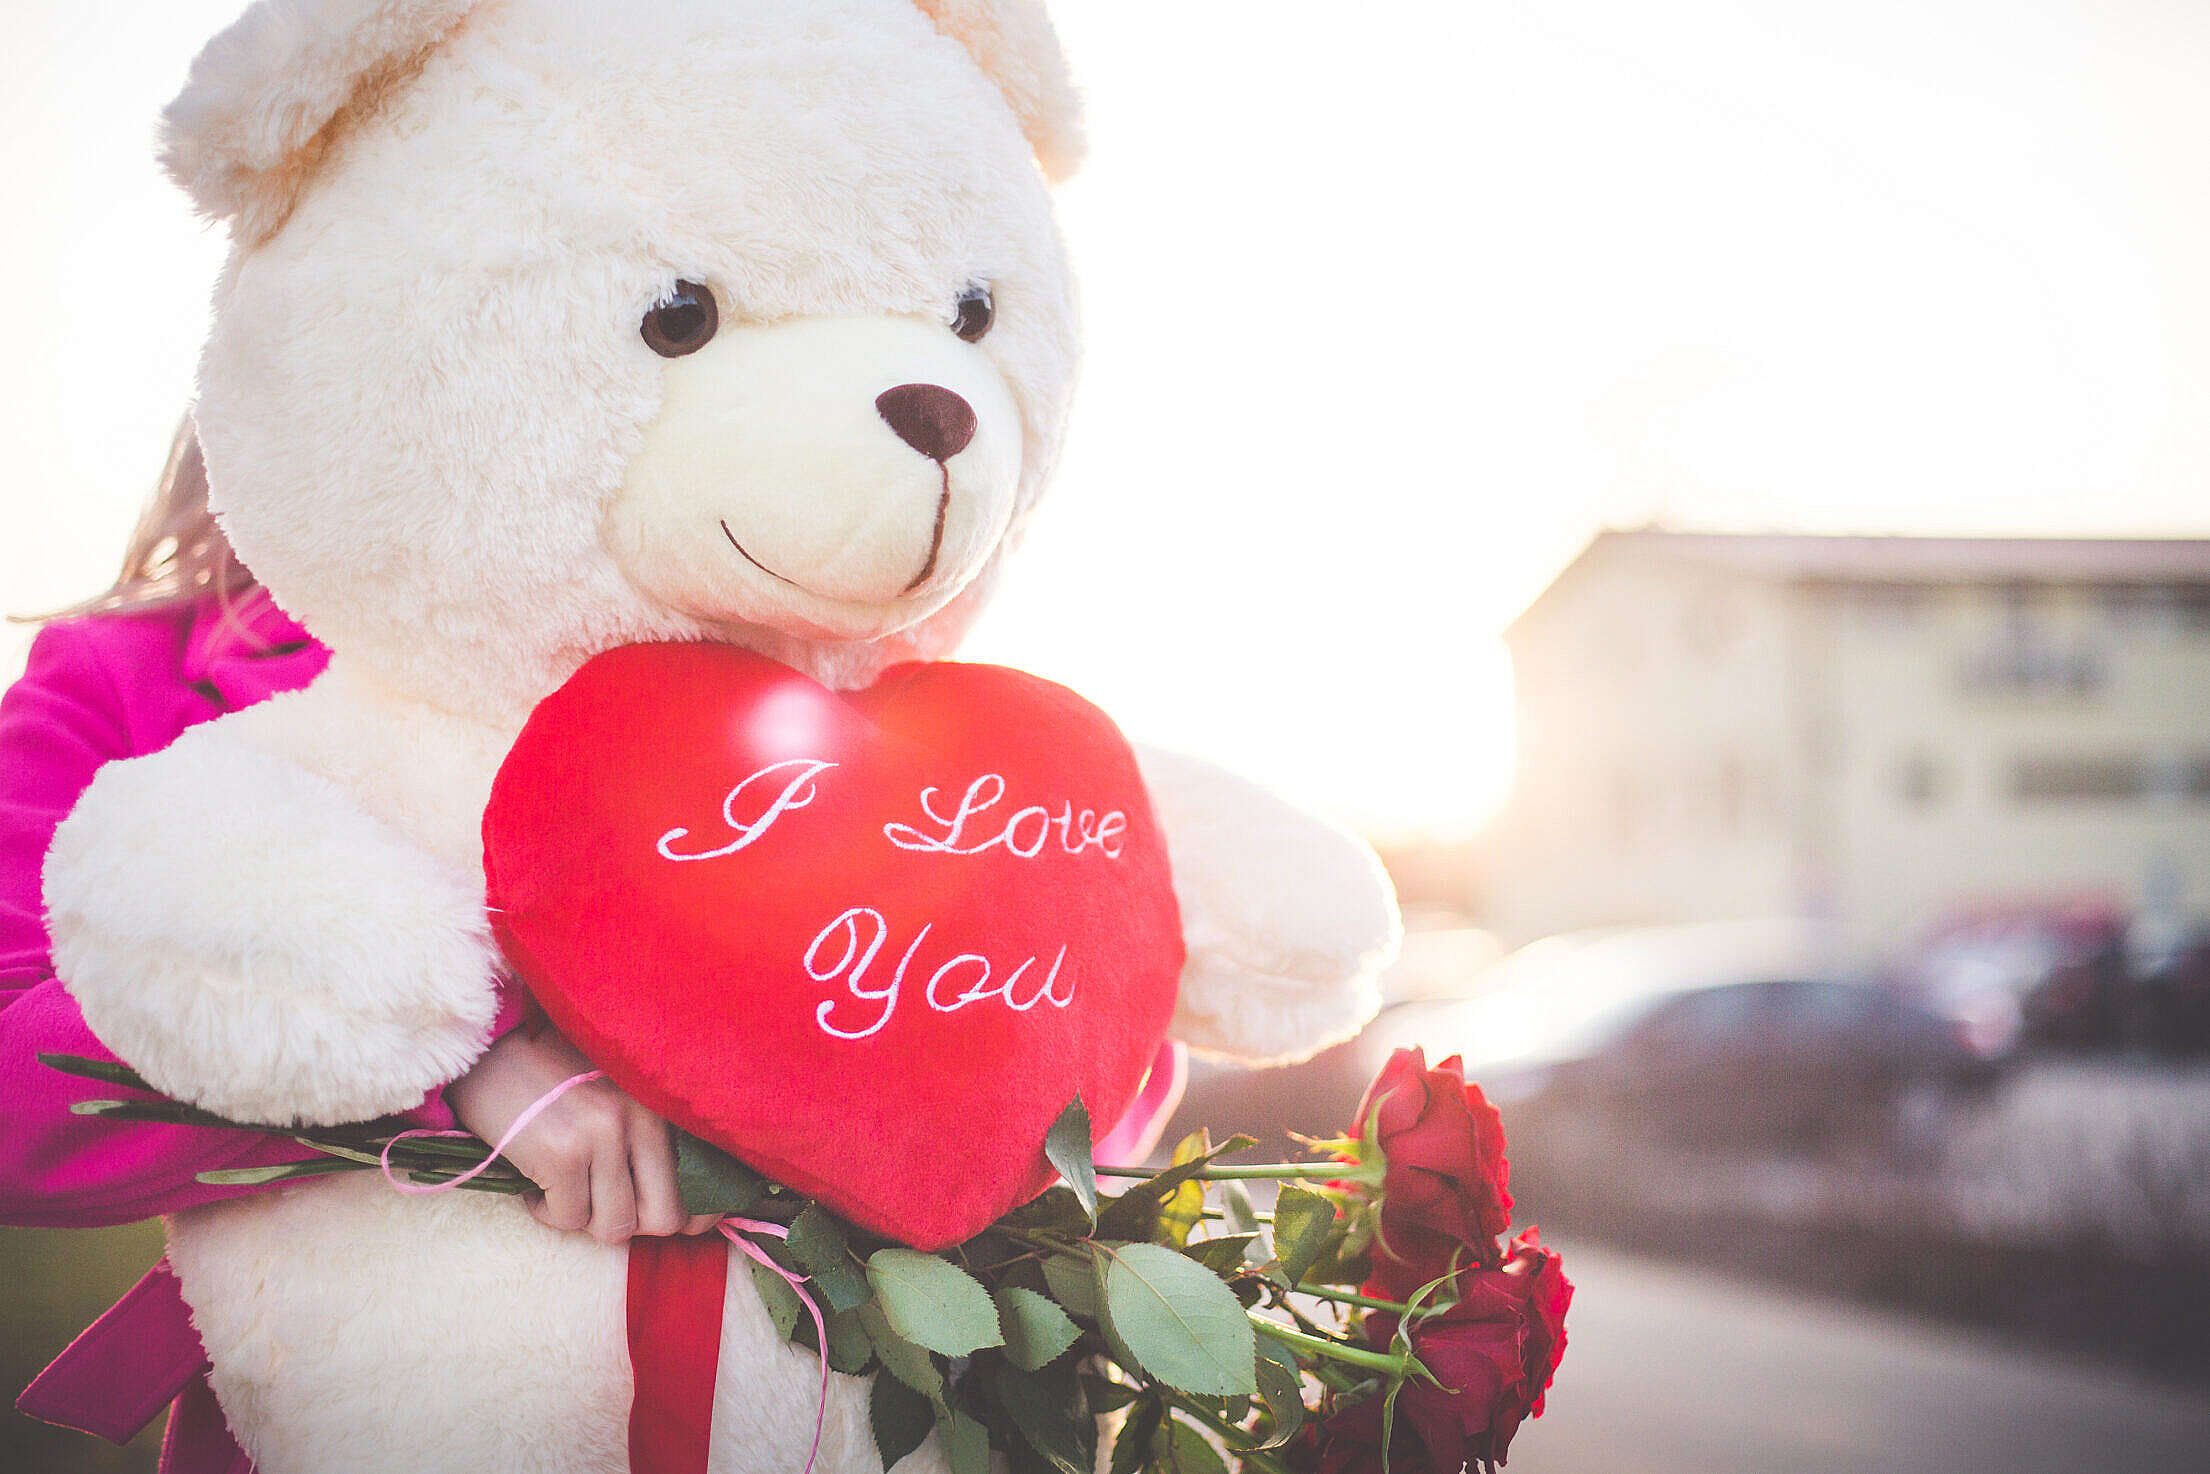 Woman Holding a Big Teddy Bear and Roses on Valentine’s Day Free Stock Photo